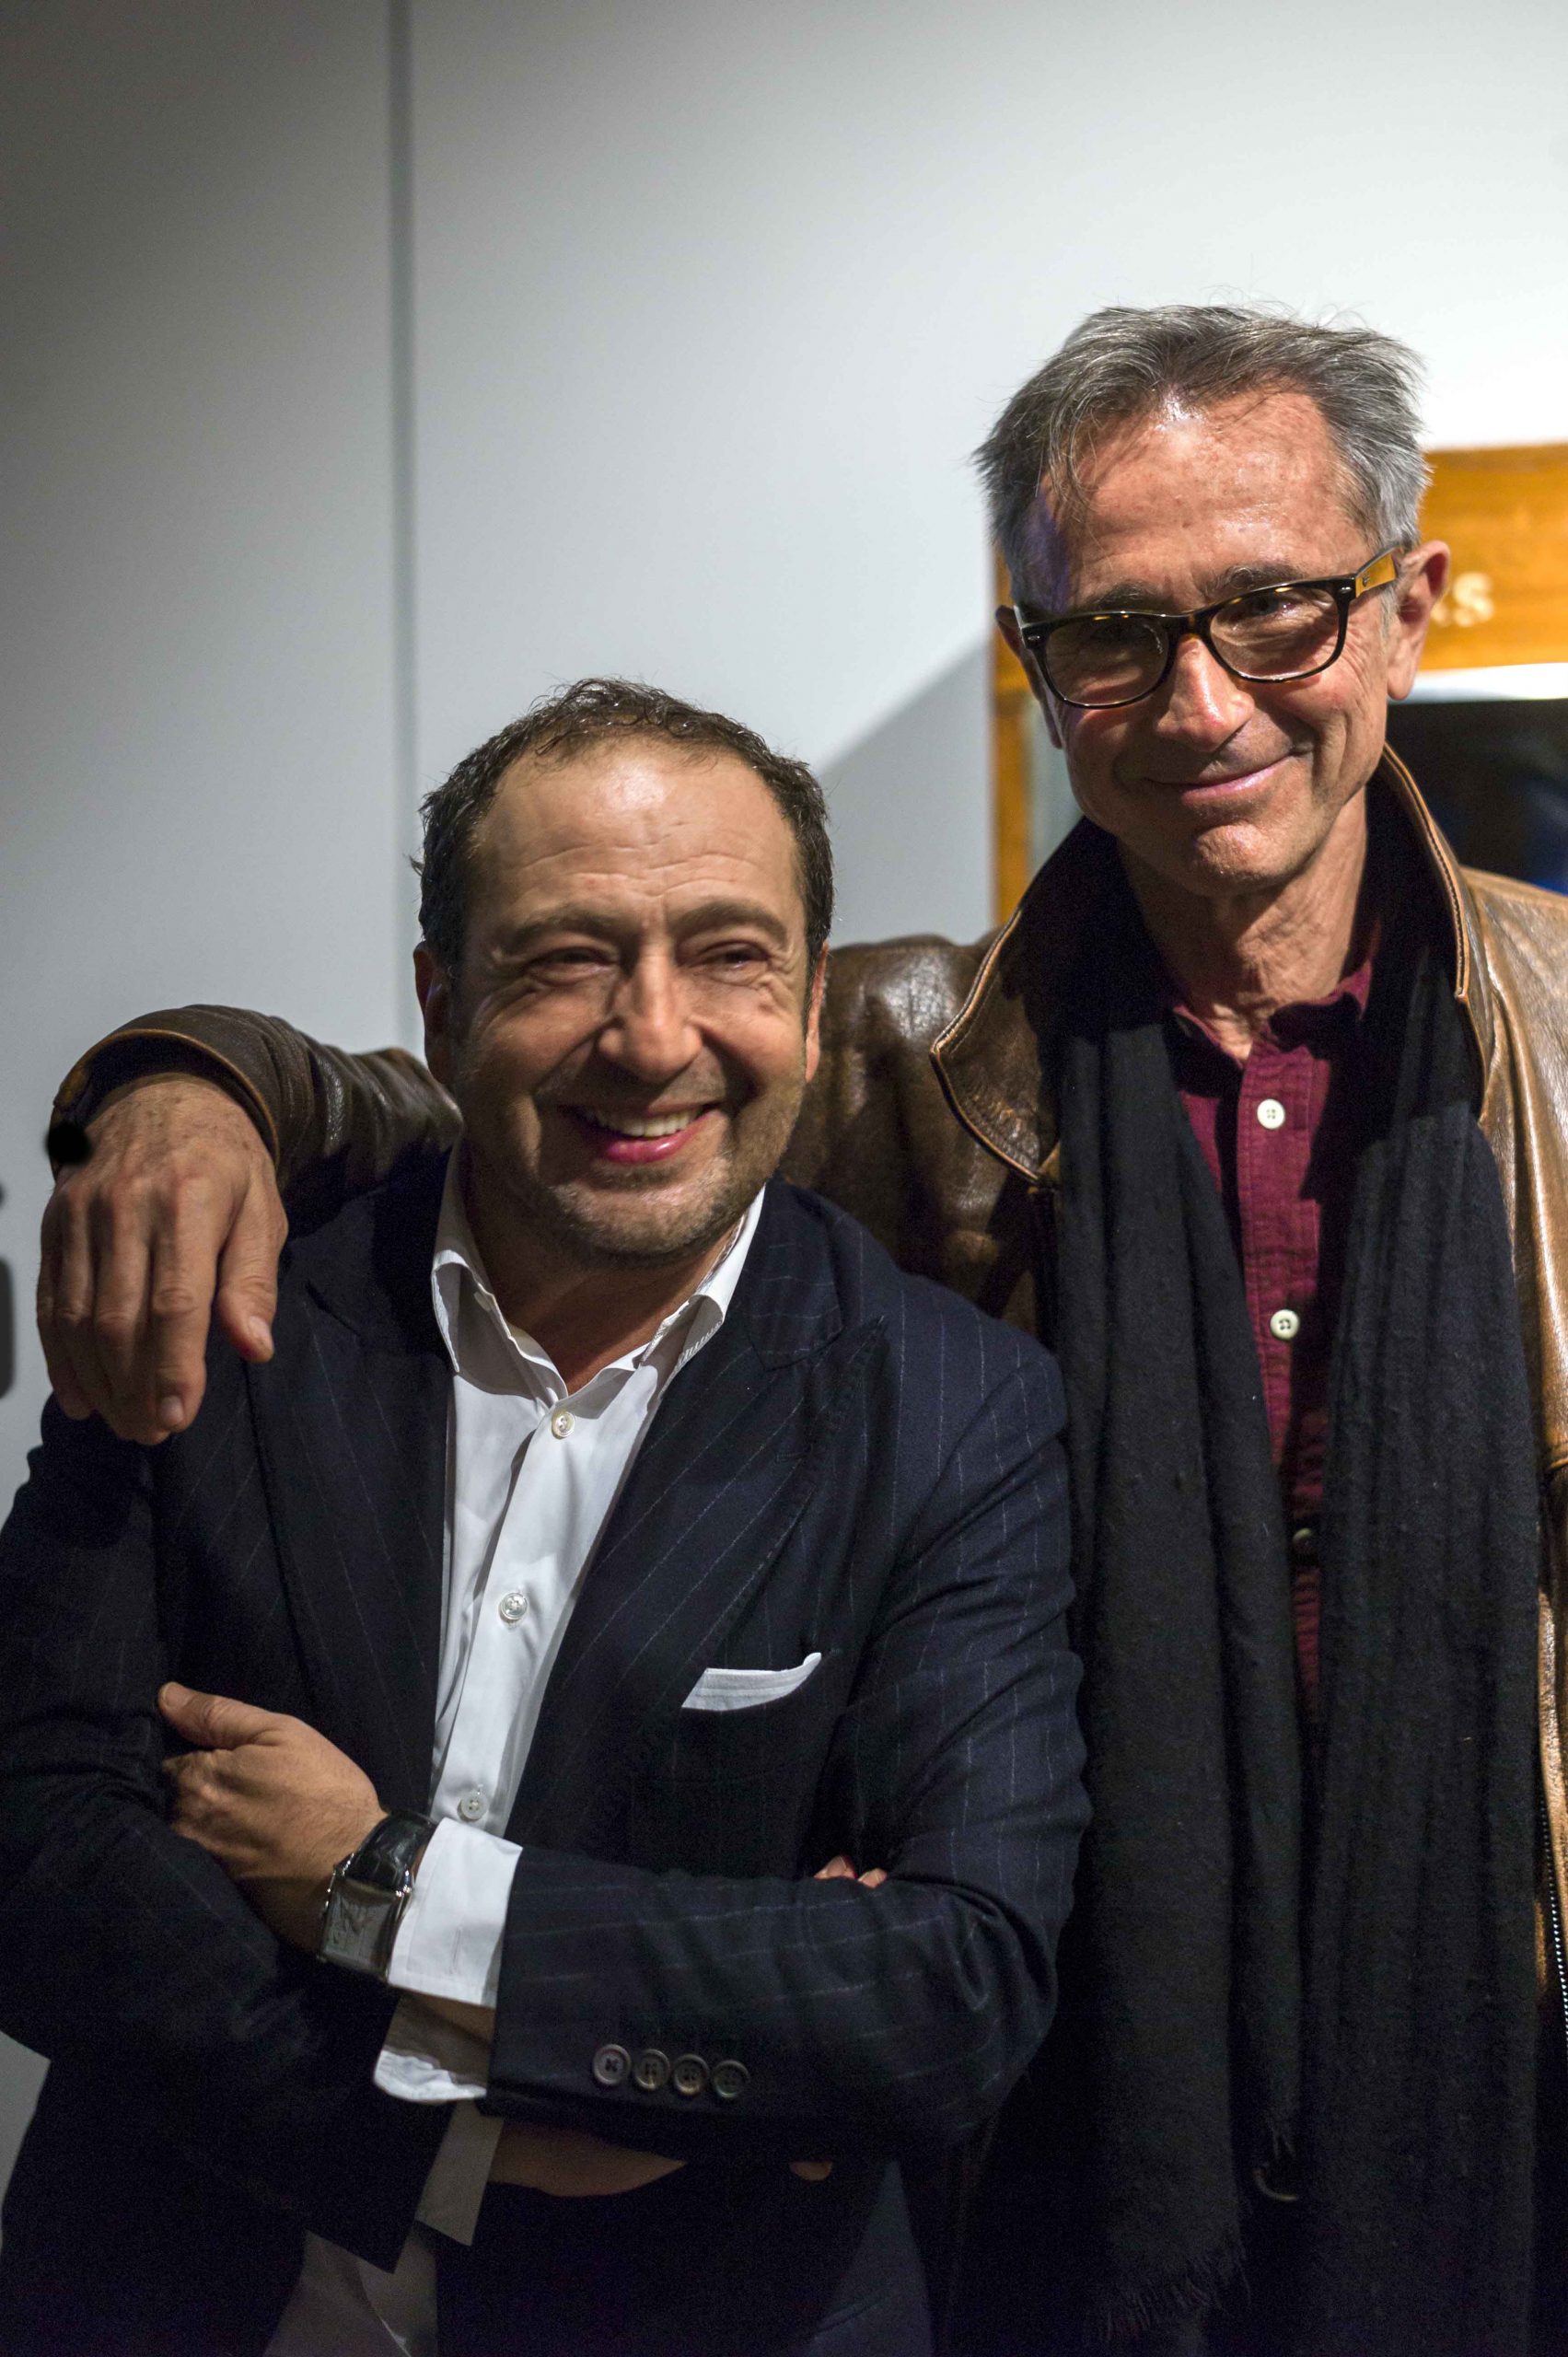 French actors Patrick Timsit and Thierry Lhermitte at the Galerie